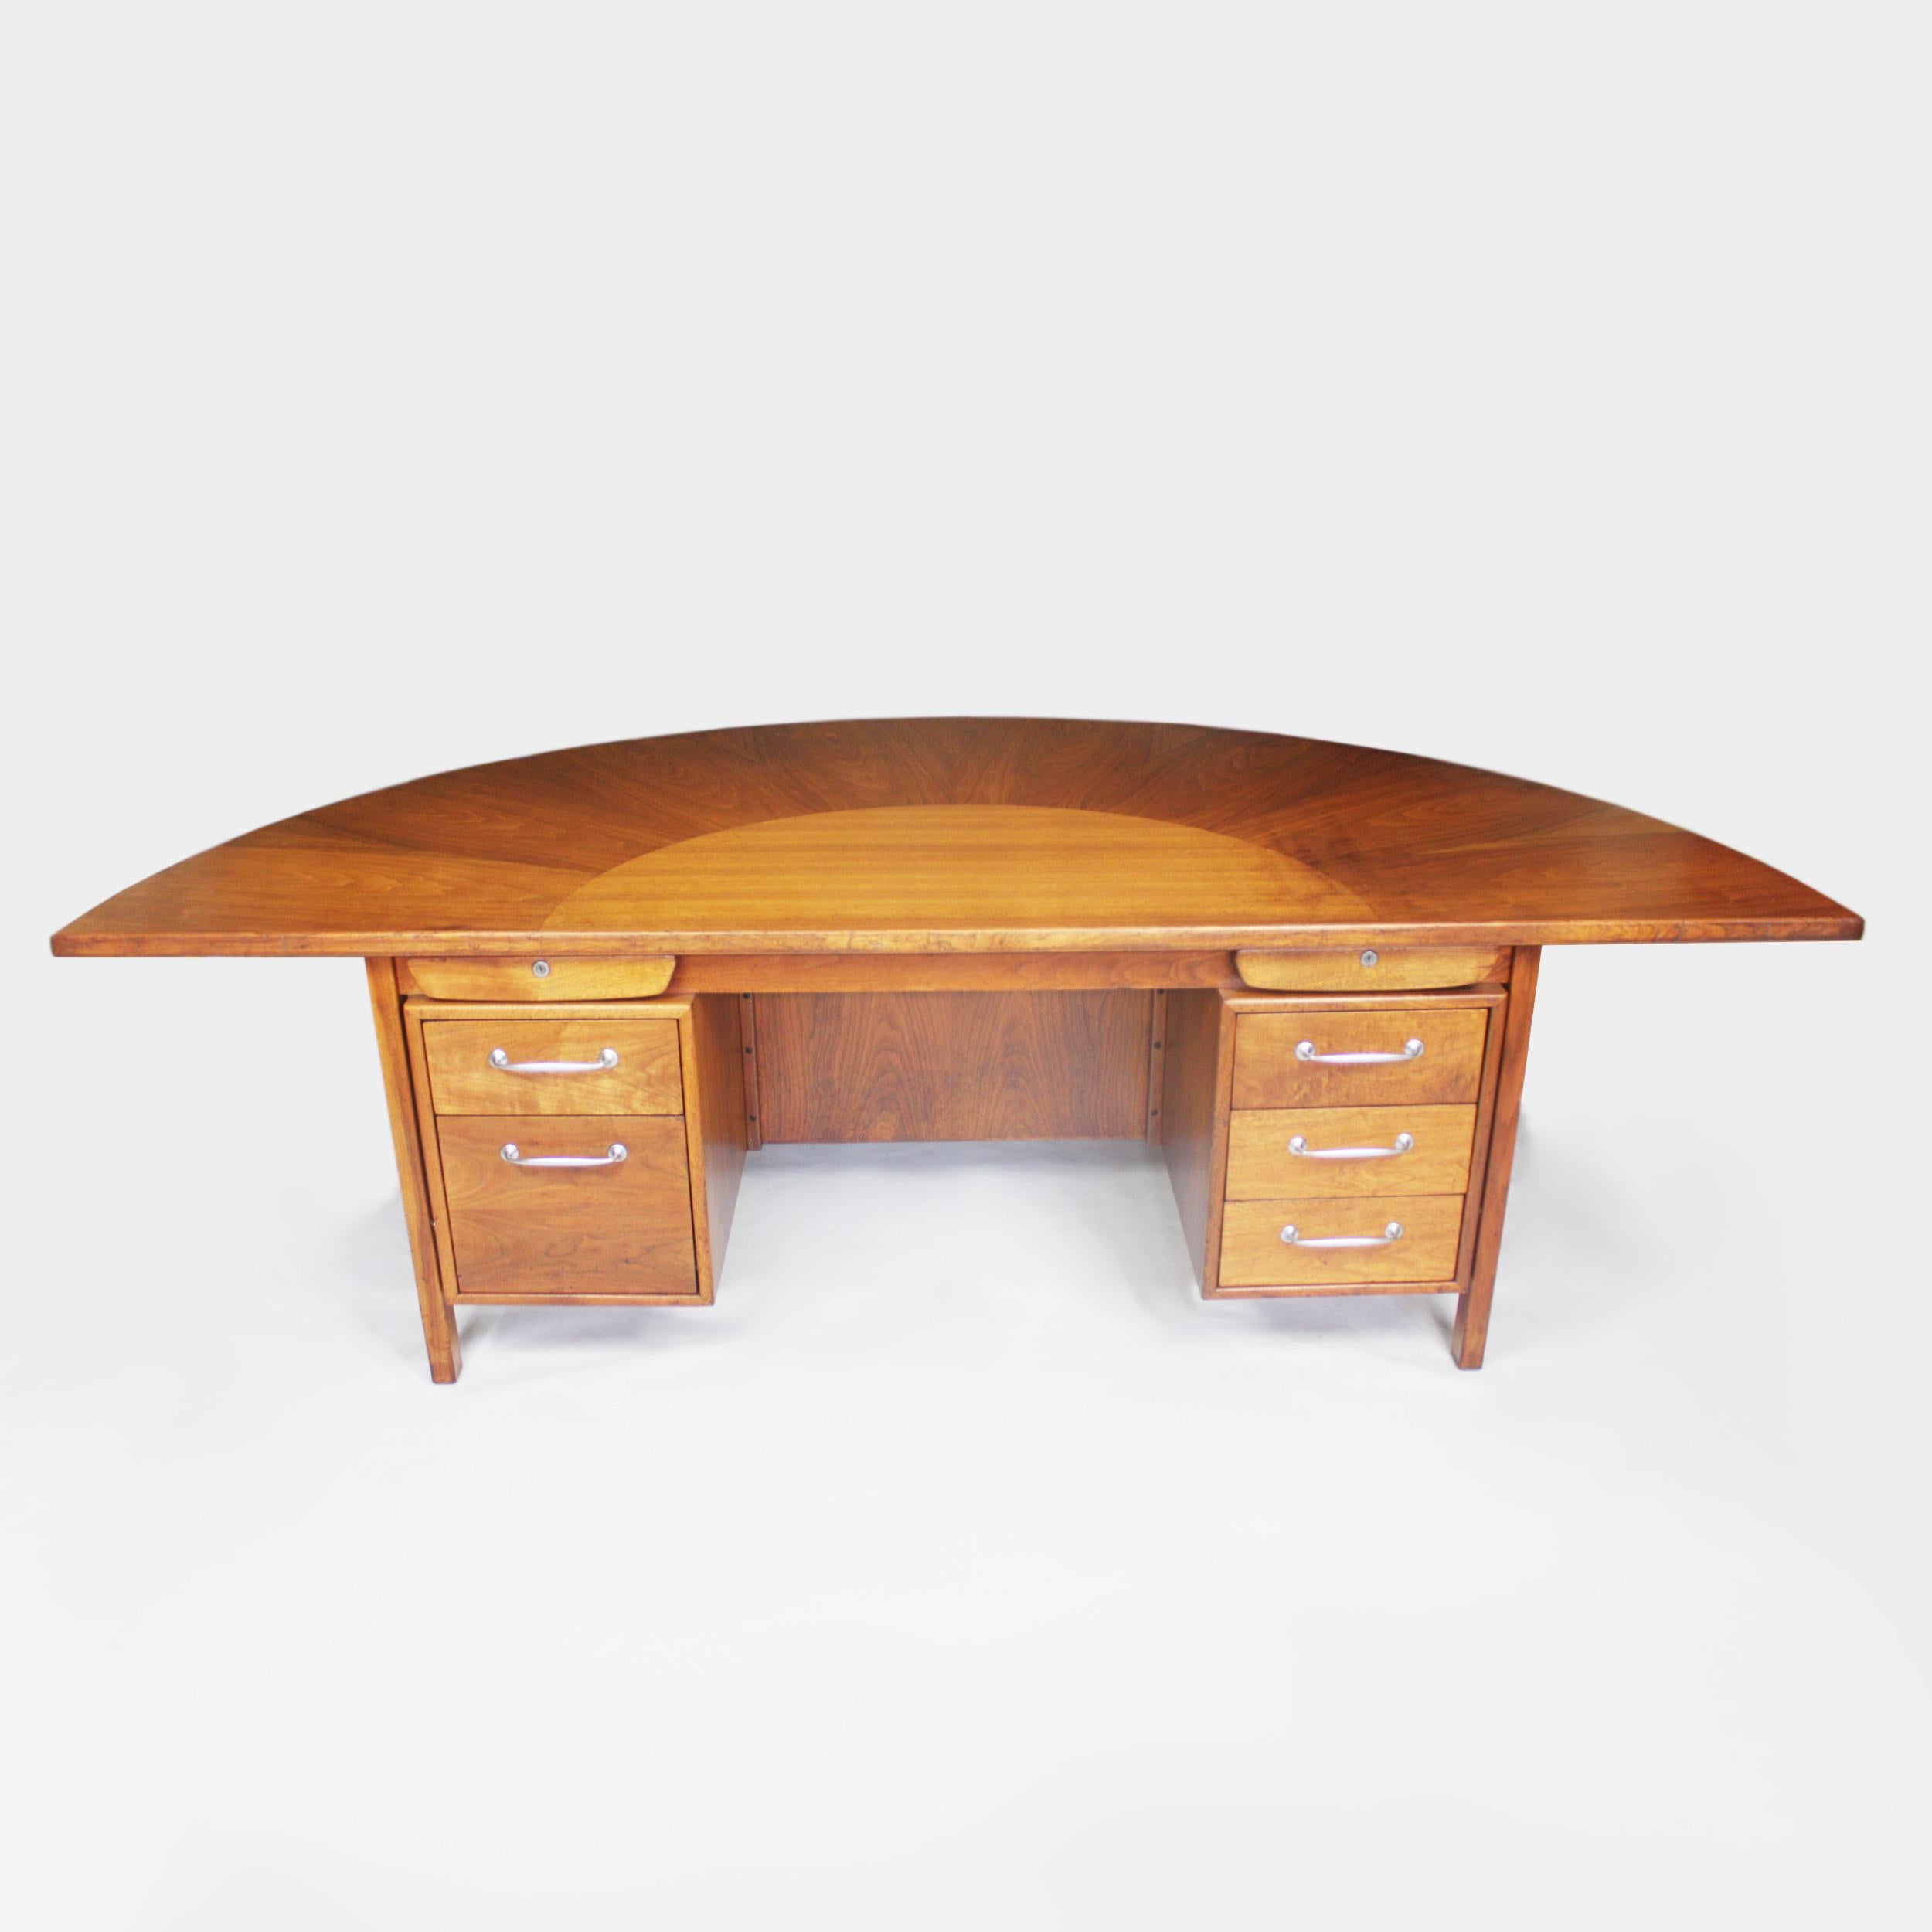 American Spectacular Mid-Century Modern Walnut Demilune Executive Desk by Jens Risom For Sale